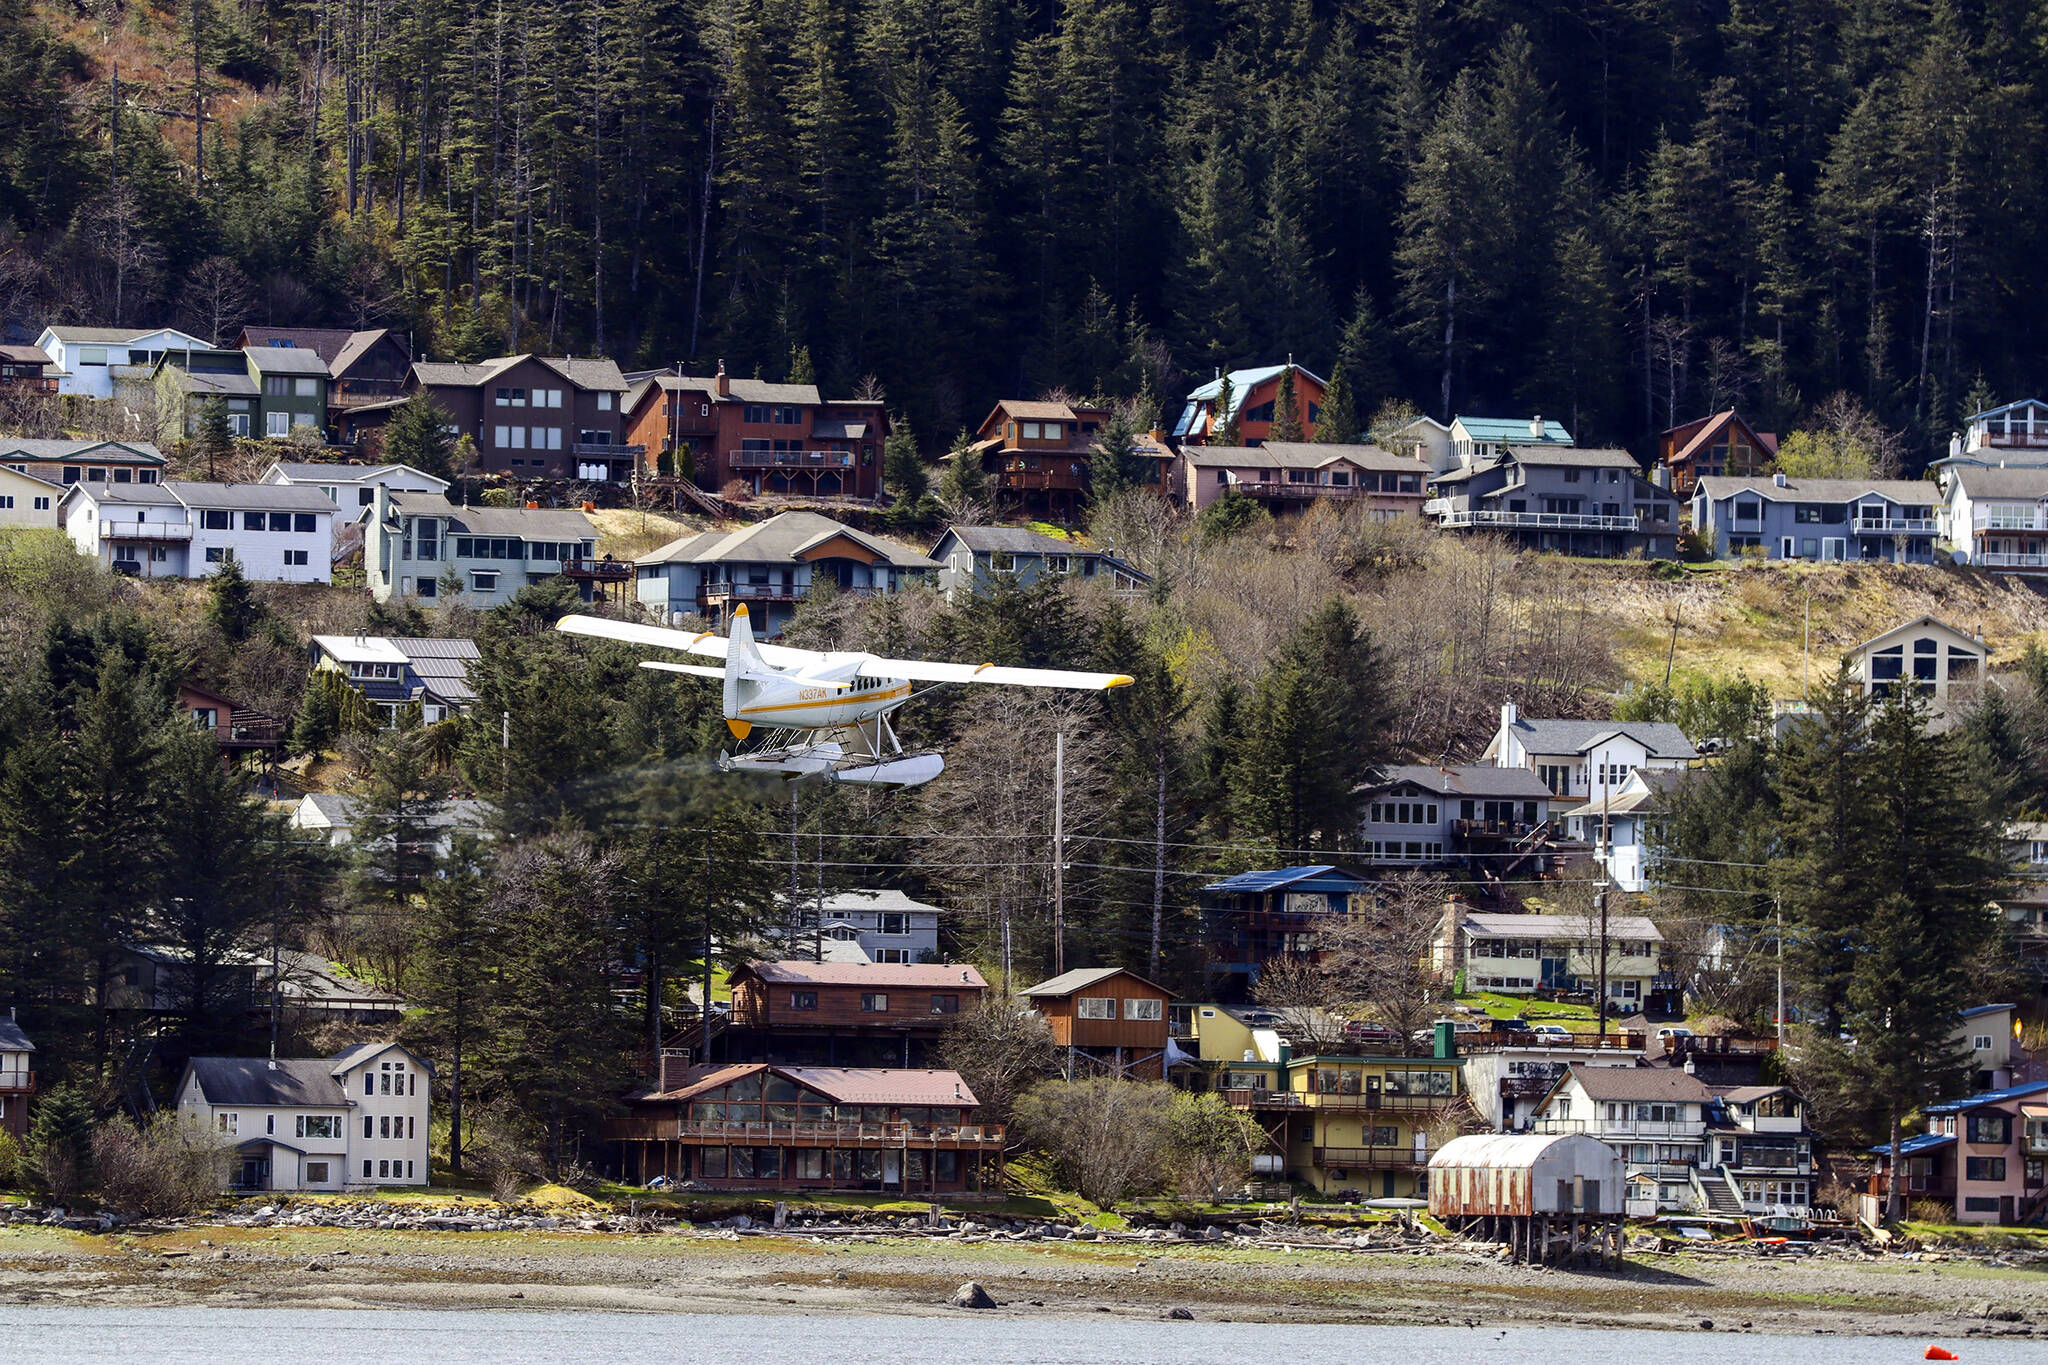 A plane flies in front of a downtown Juneau neighborhood in early May. City and Borough of Juneau Assembly Finance Committee members Wednesday discussed the availability of housing in Juneau. So far, Assembly members said, a tax abatement meant to spur development downtown has not been successful. (Michael S. Lockett / Juneau Empire File)